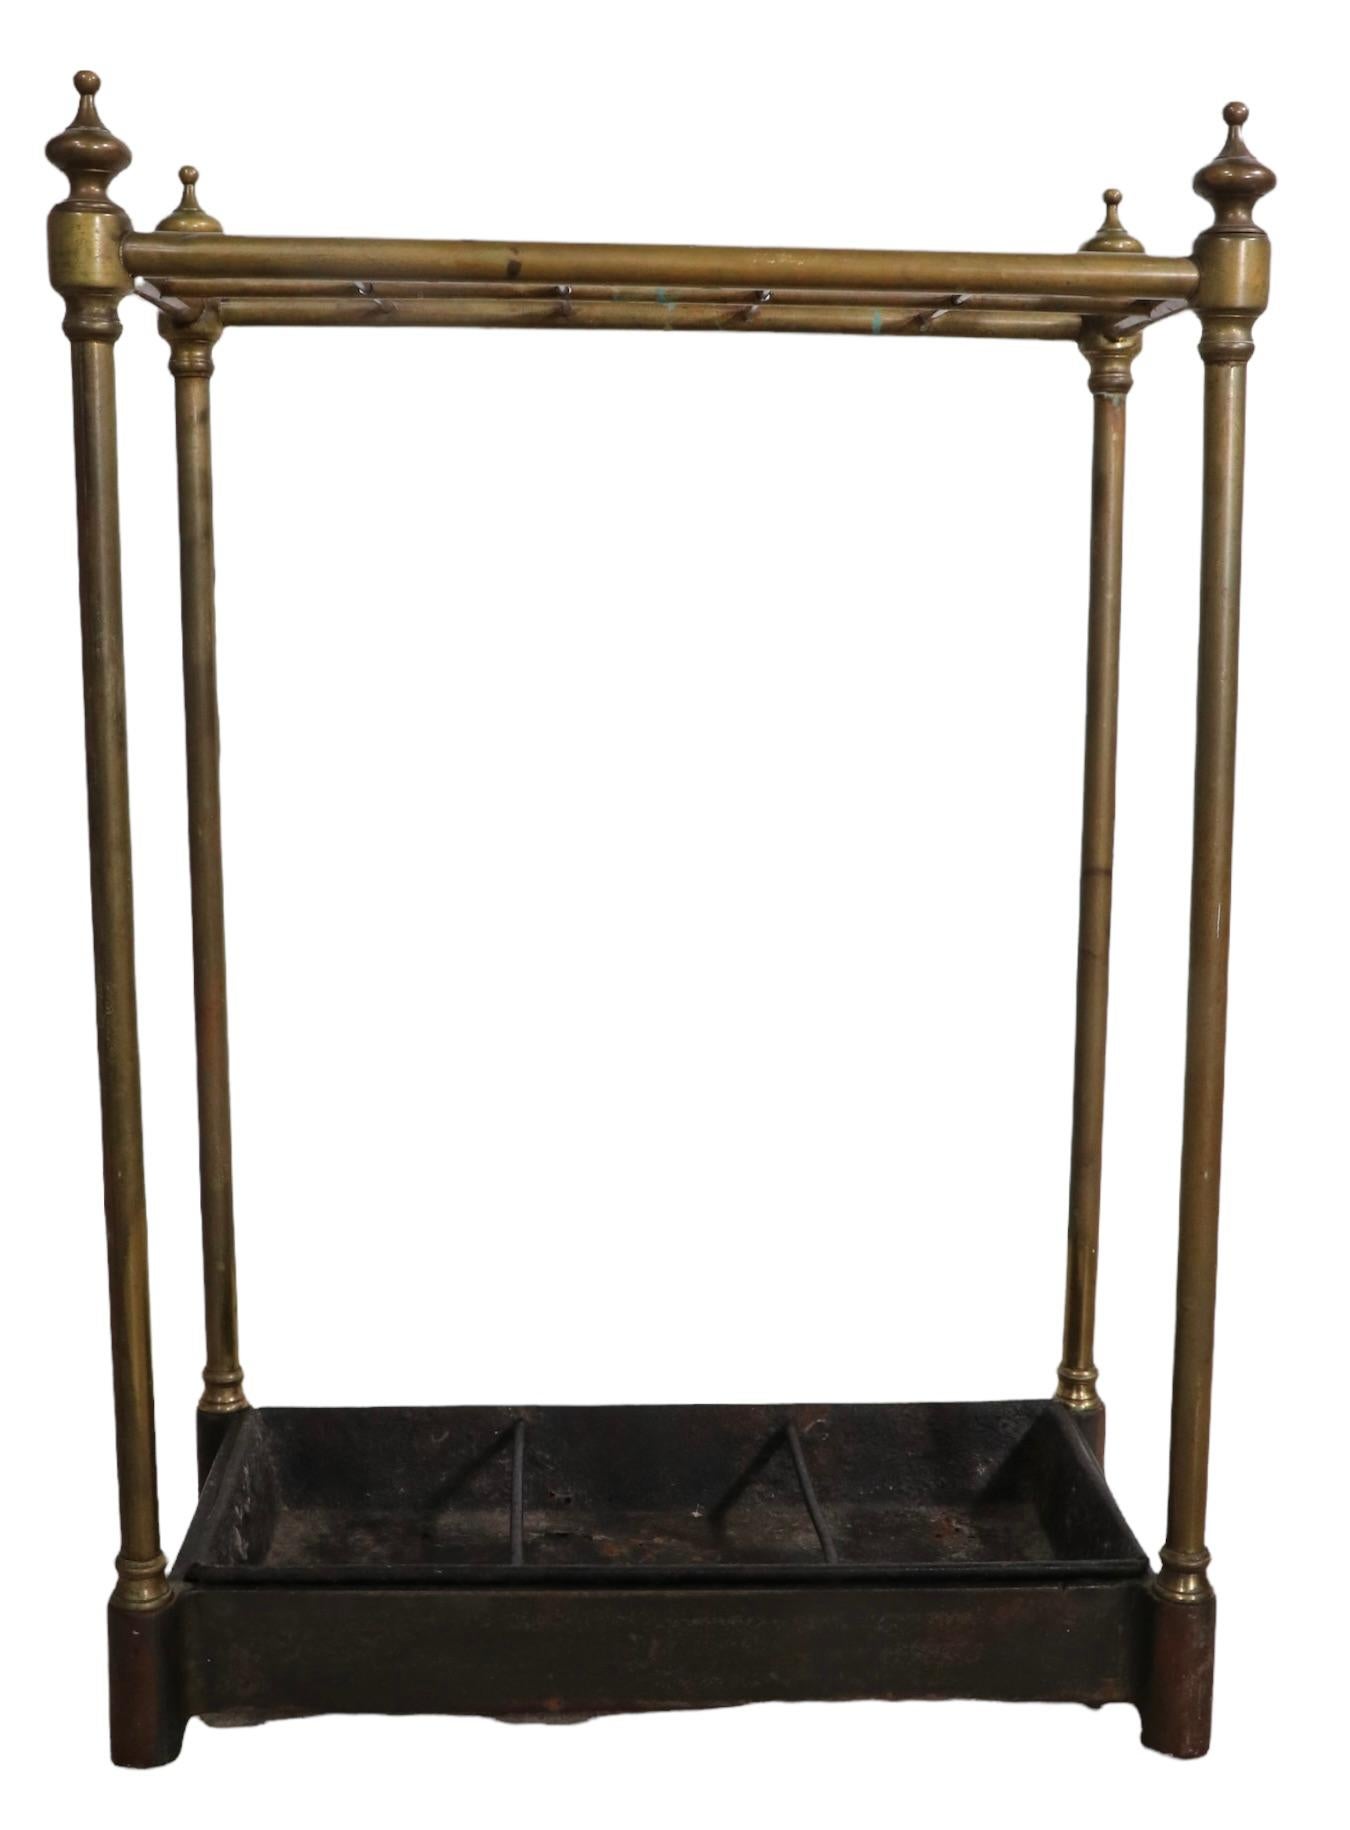 Architectural Brass and Iron Cane Umbrella Stand For Sale 2